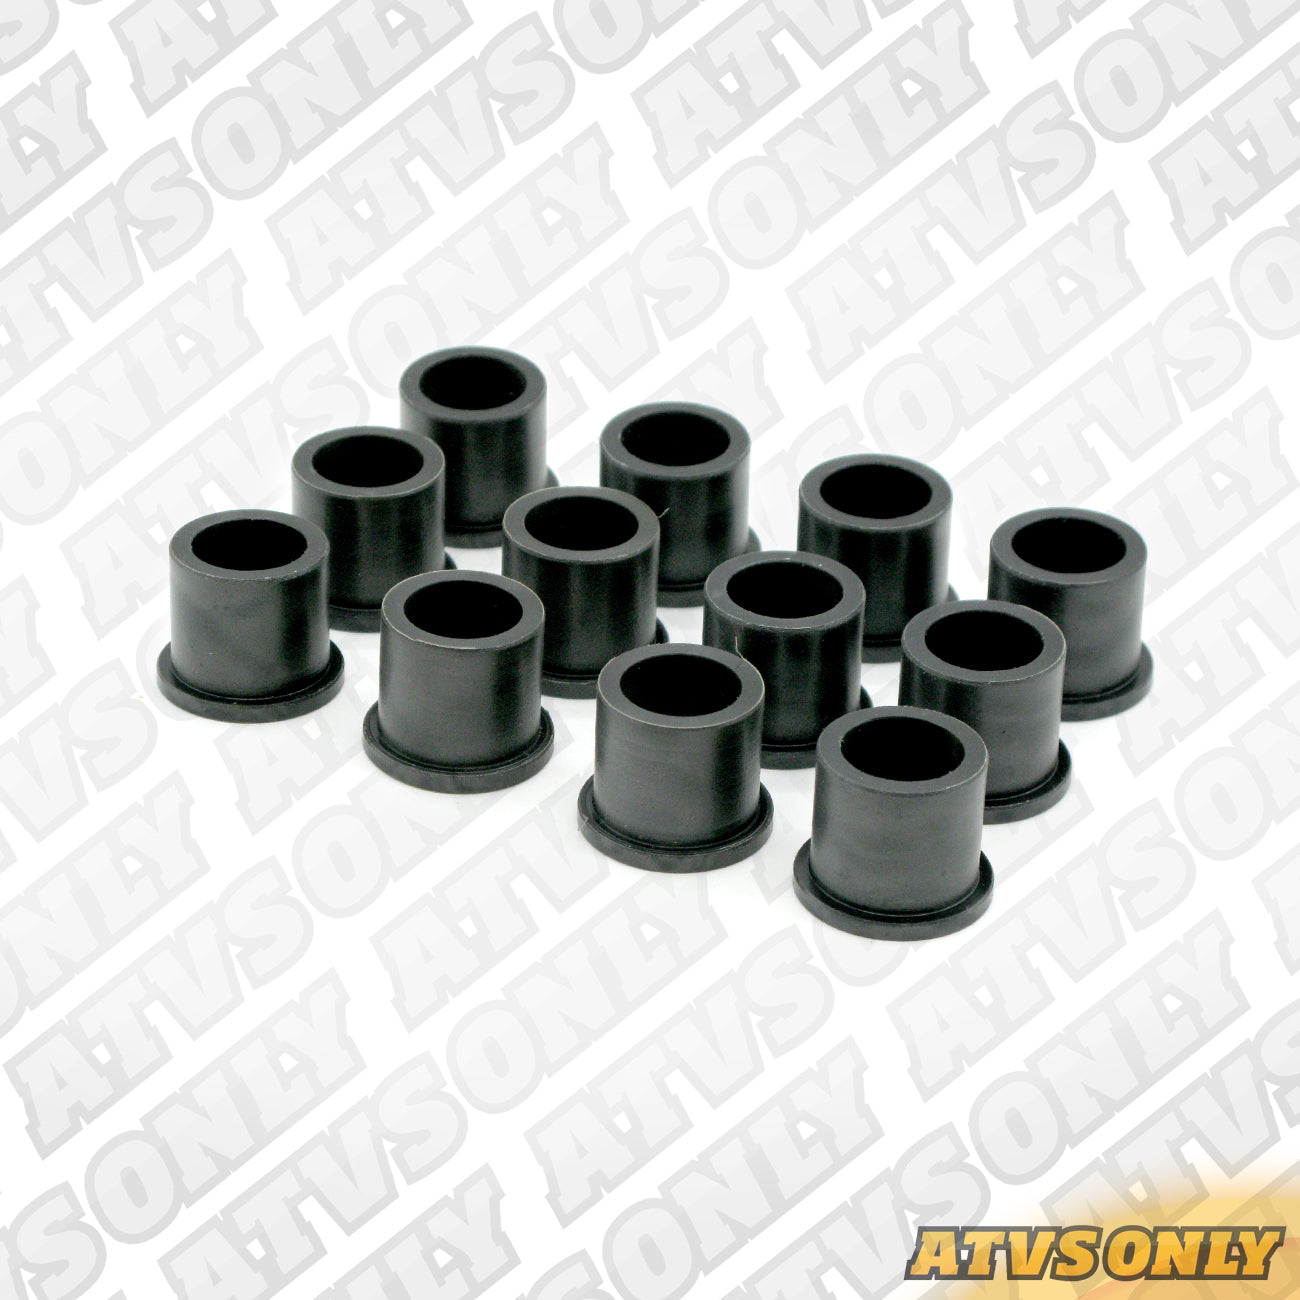 A-Arm Bushings (Upper or Lower, x12) for Yamaha Applications